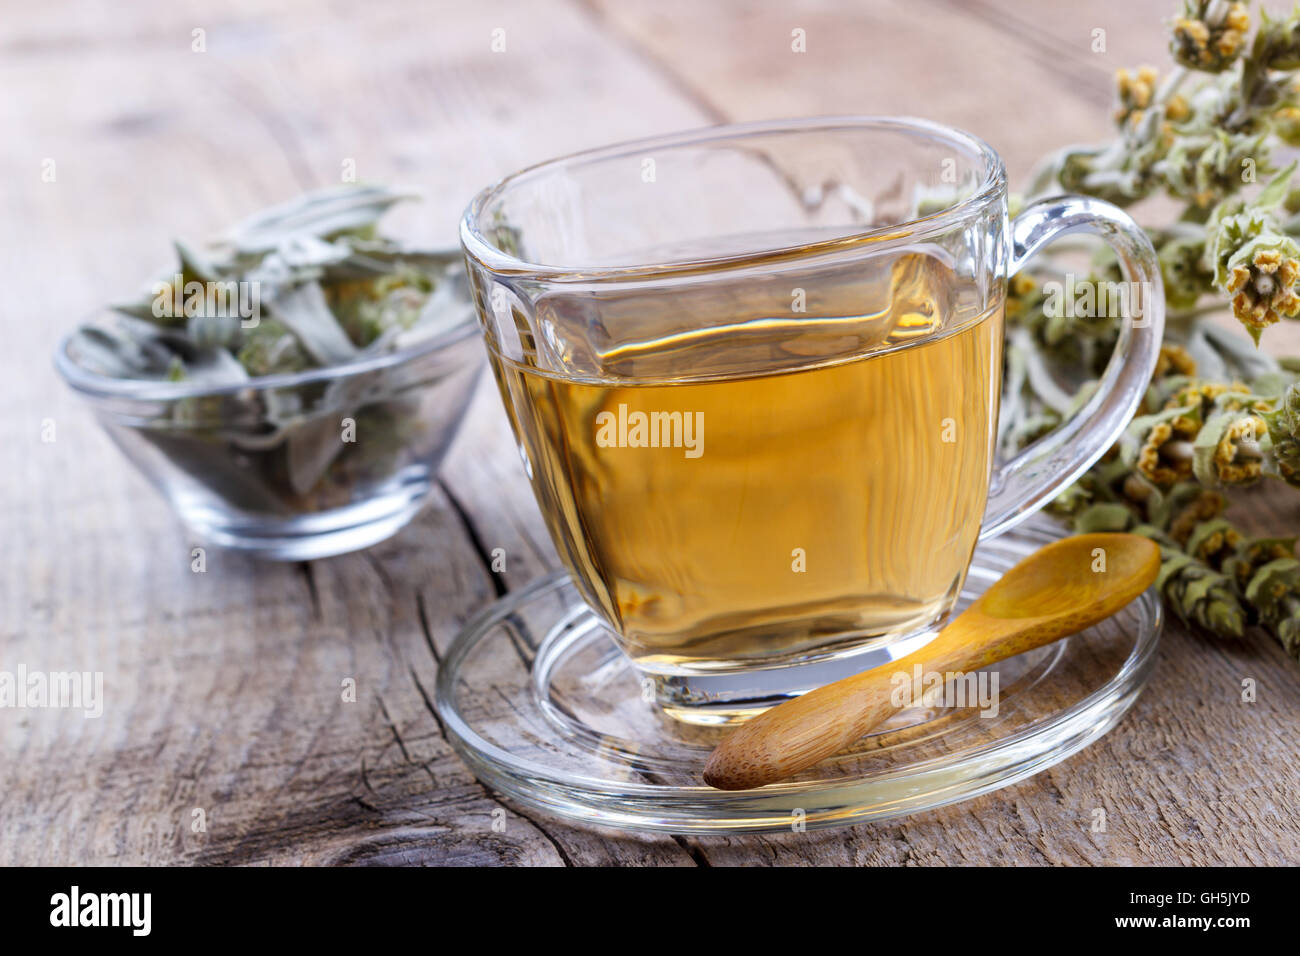 Mountain tea. Sideritis herbal tea and flowers on wooden background,selective focus Stock Photo